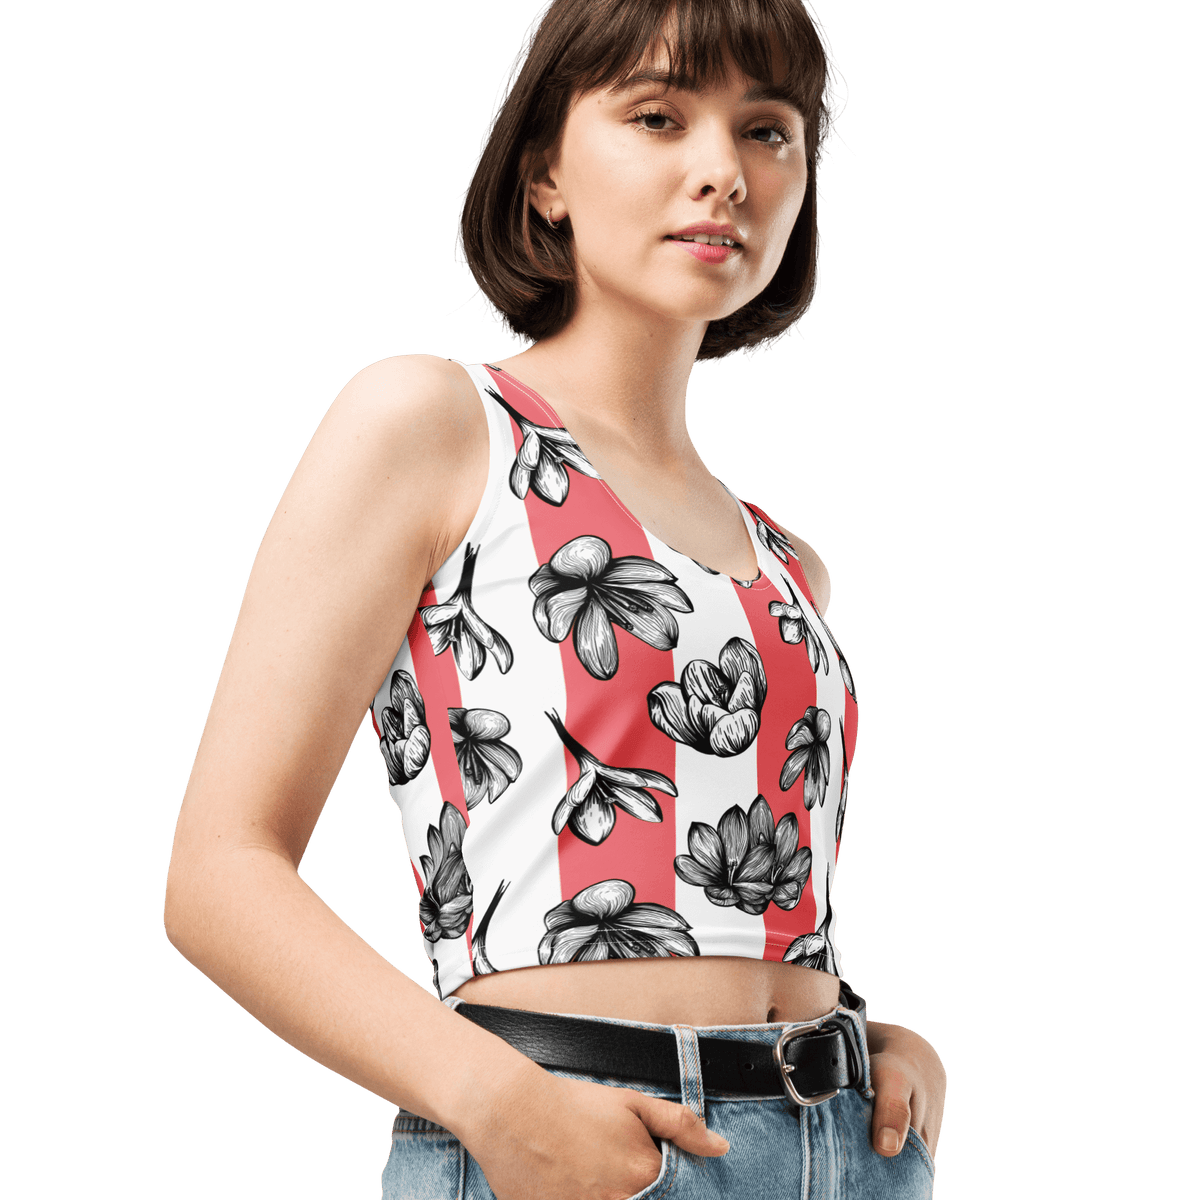 Floral Fashion, Blooms Crop Top, Garden Vibes, Petal Perfection, Flower Power, Botanical Beauty, Blossom Chic, Nature-Inspired, Trendy Florals, Statement Piece